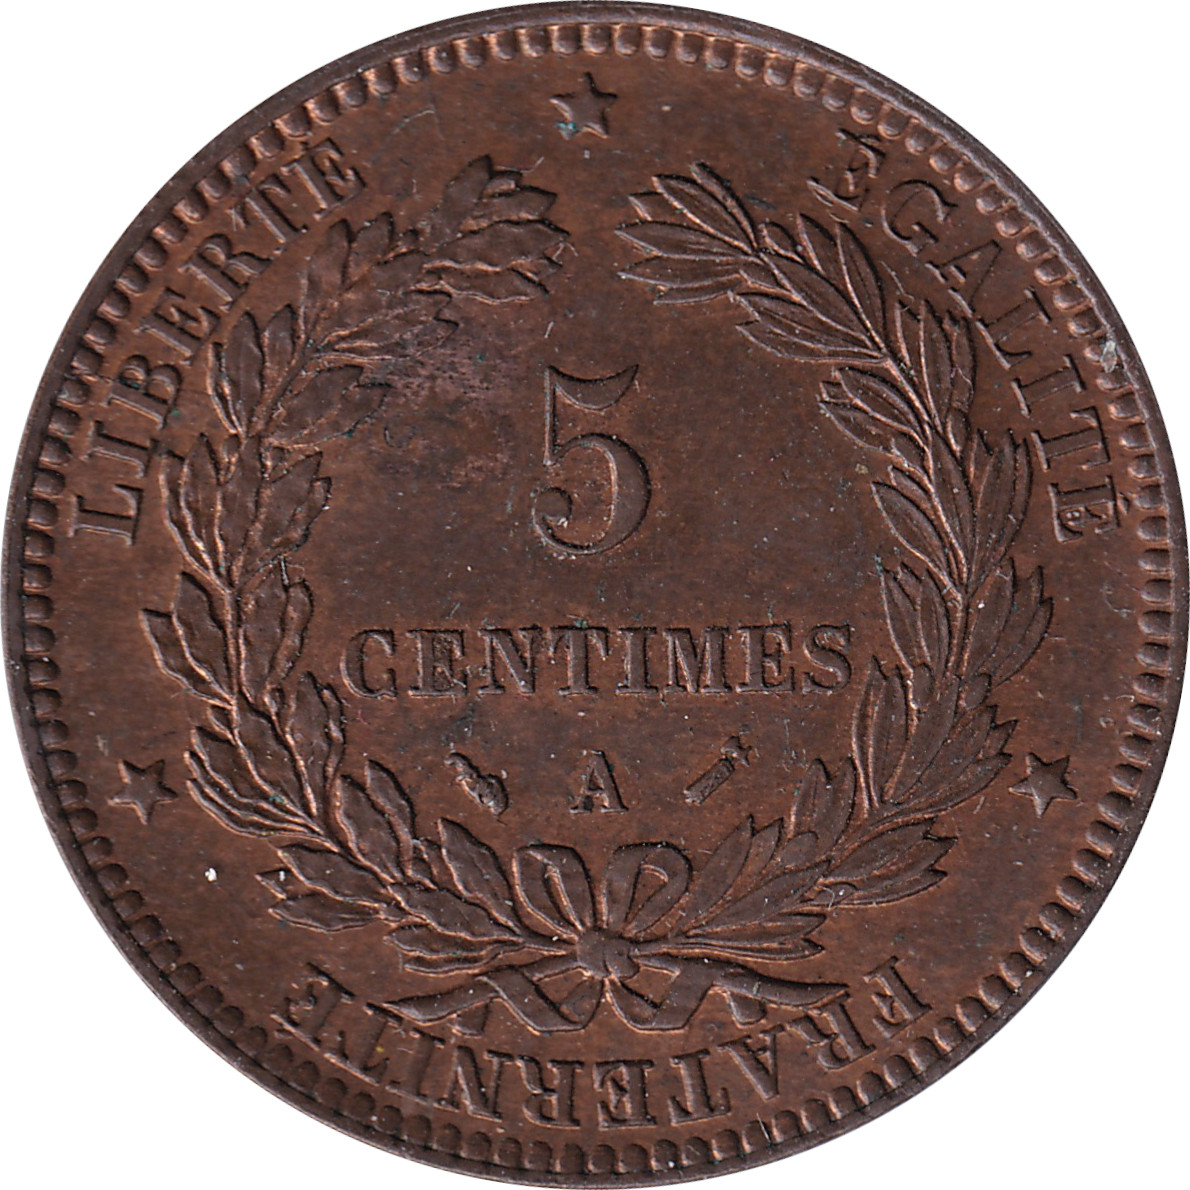 5 centimes - Ceres